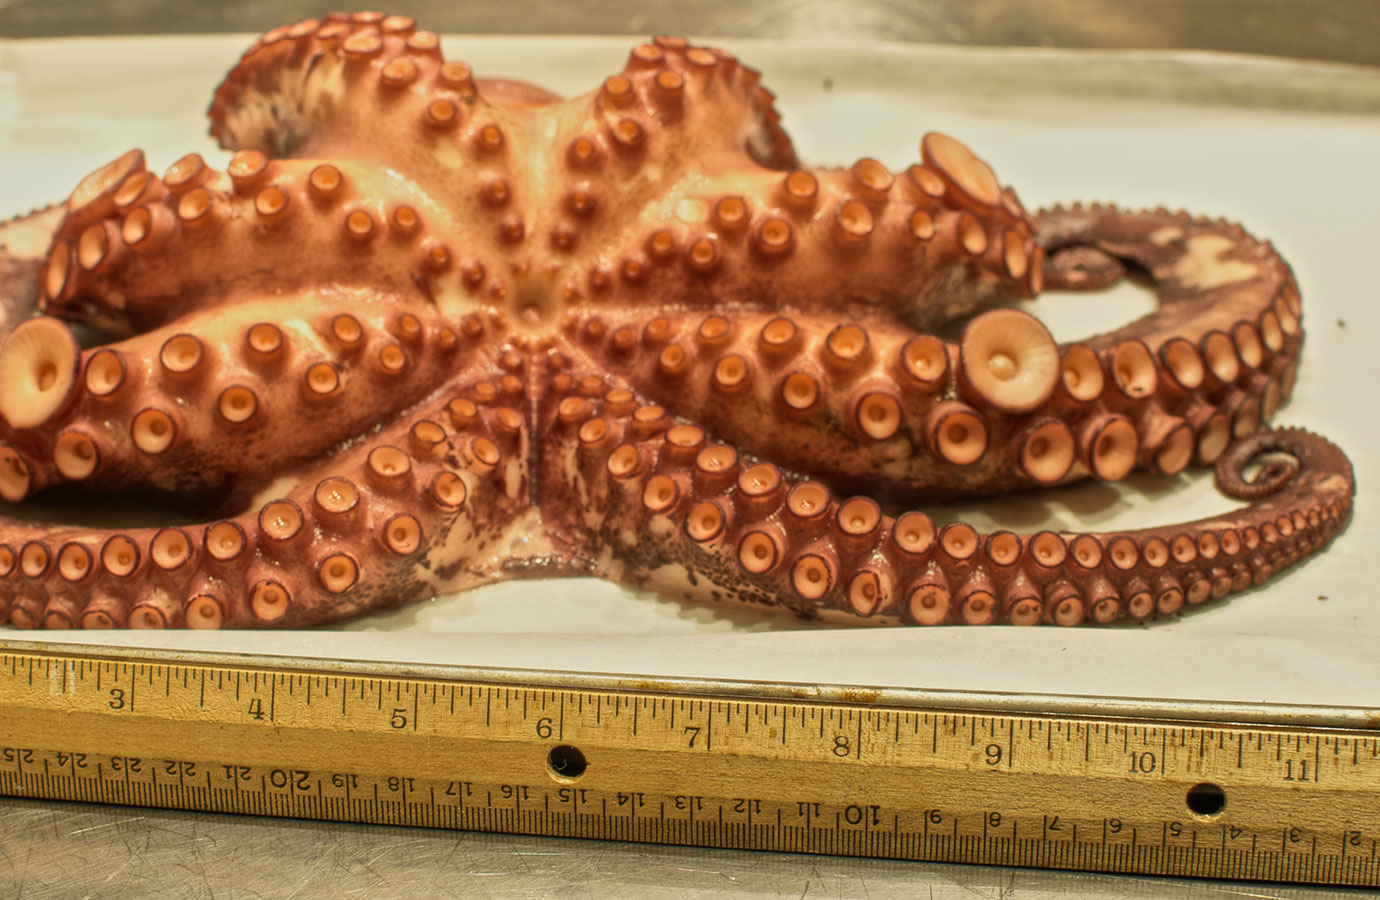 Large Cooked Octopus